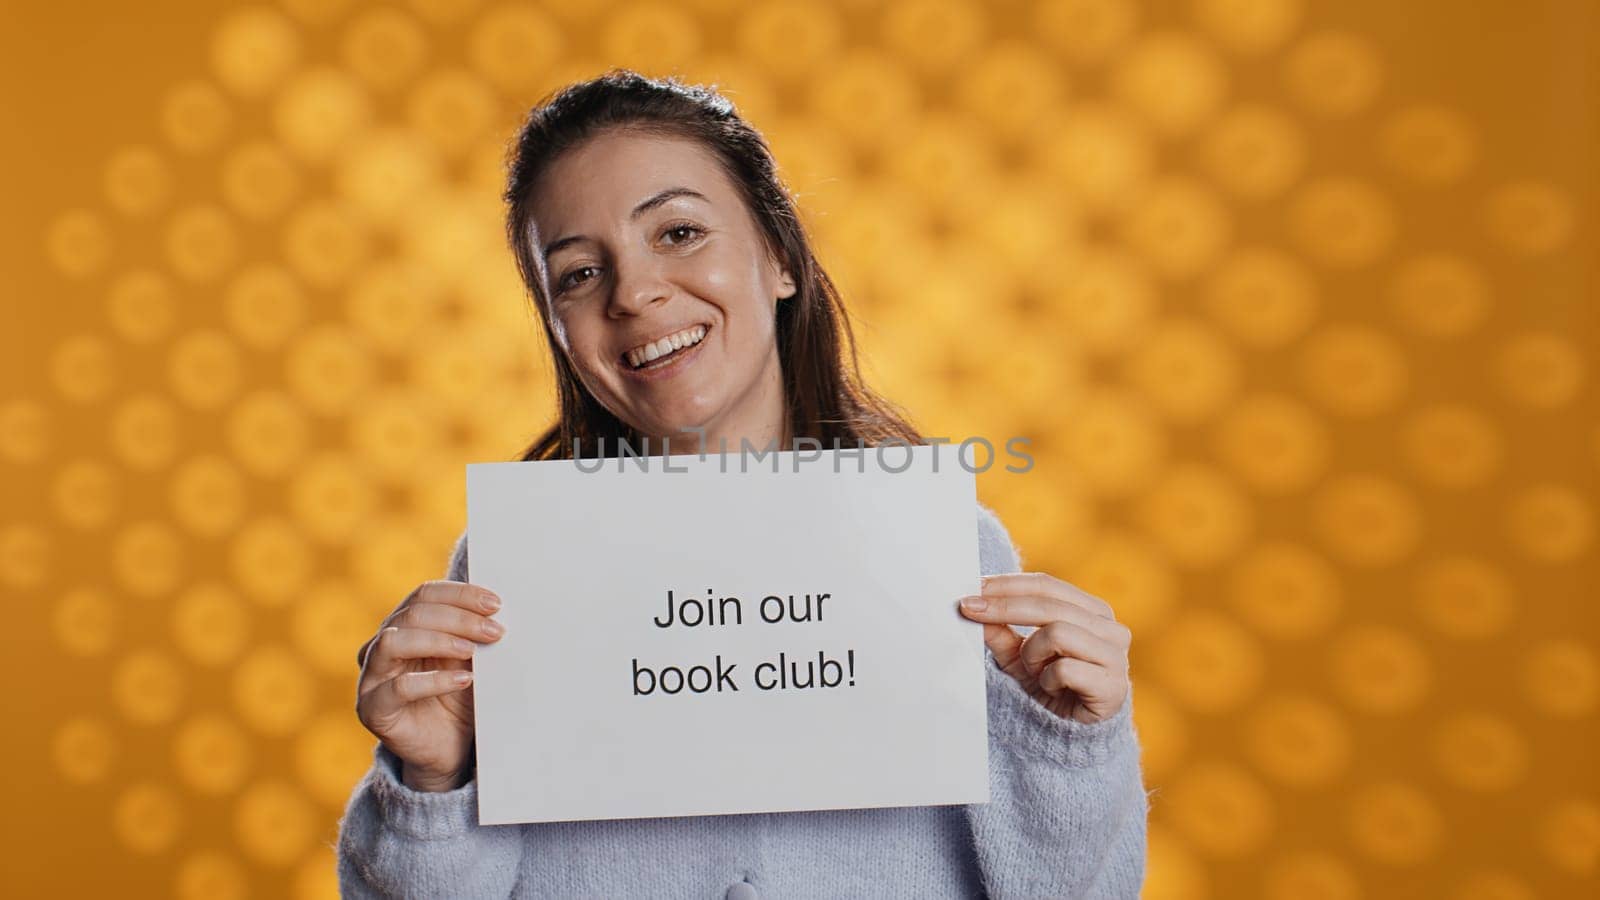 Book club president holds message urging people to join them, studio background by DCStudio